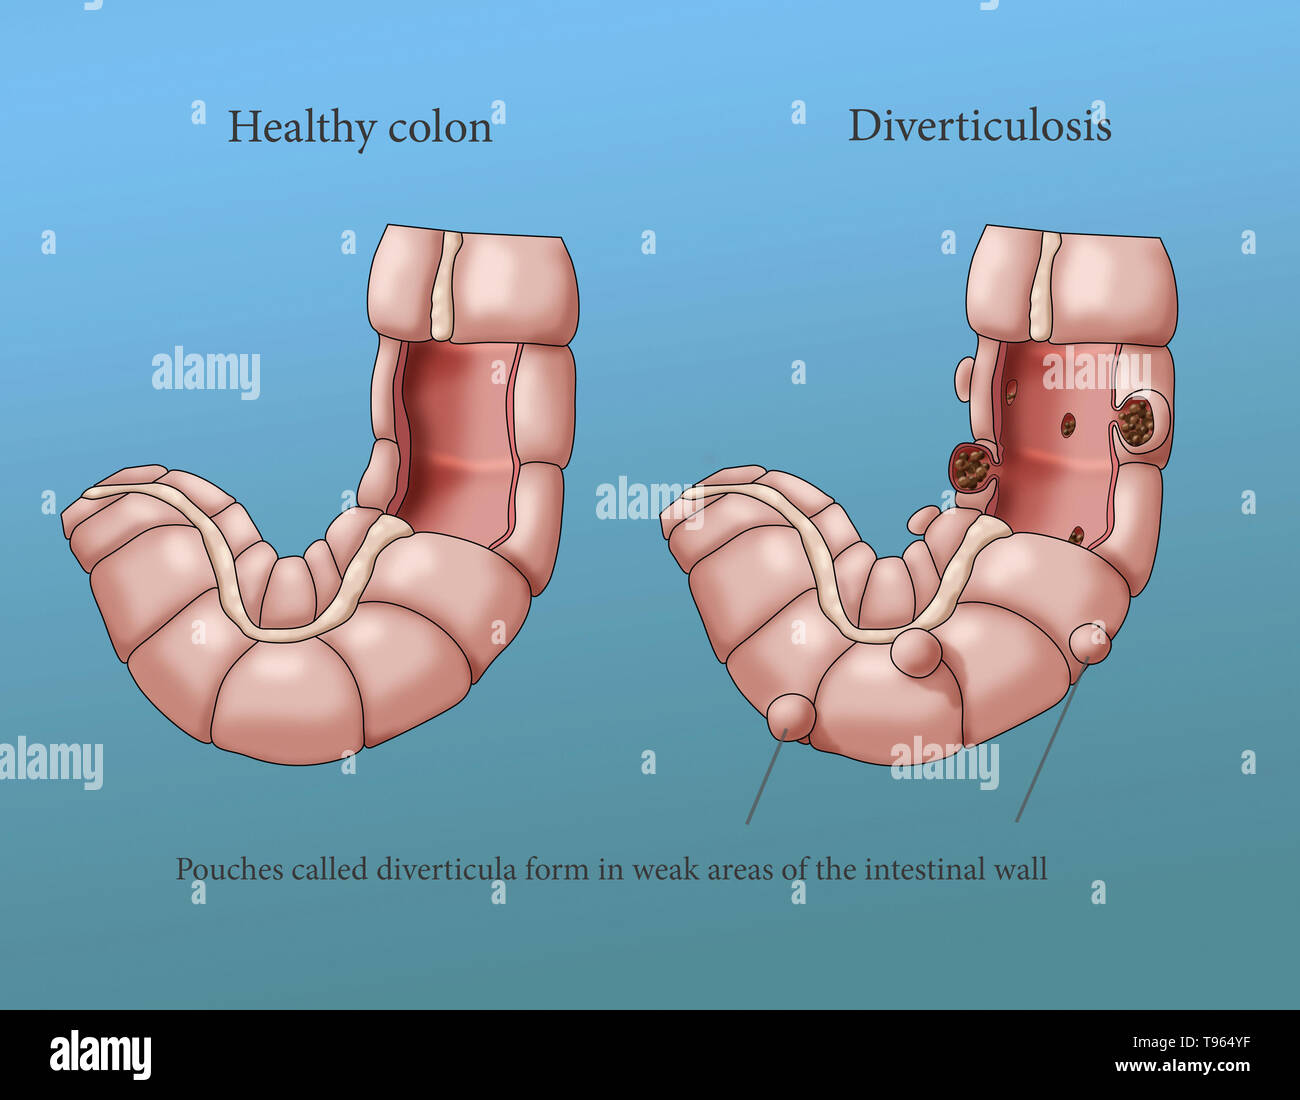 Illustration comparing the appearance of a healthy colon (left) to one with diverticulosis (right). Stock Photo